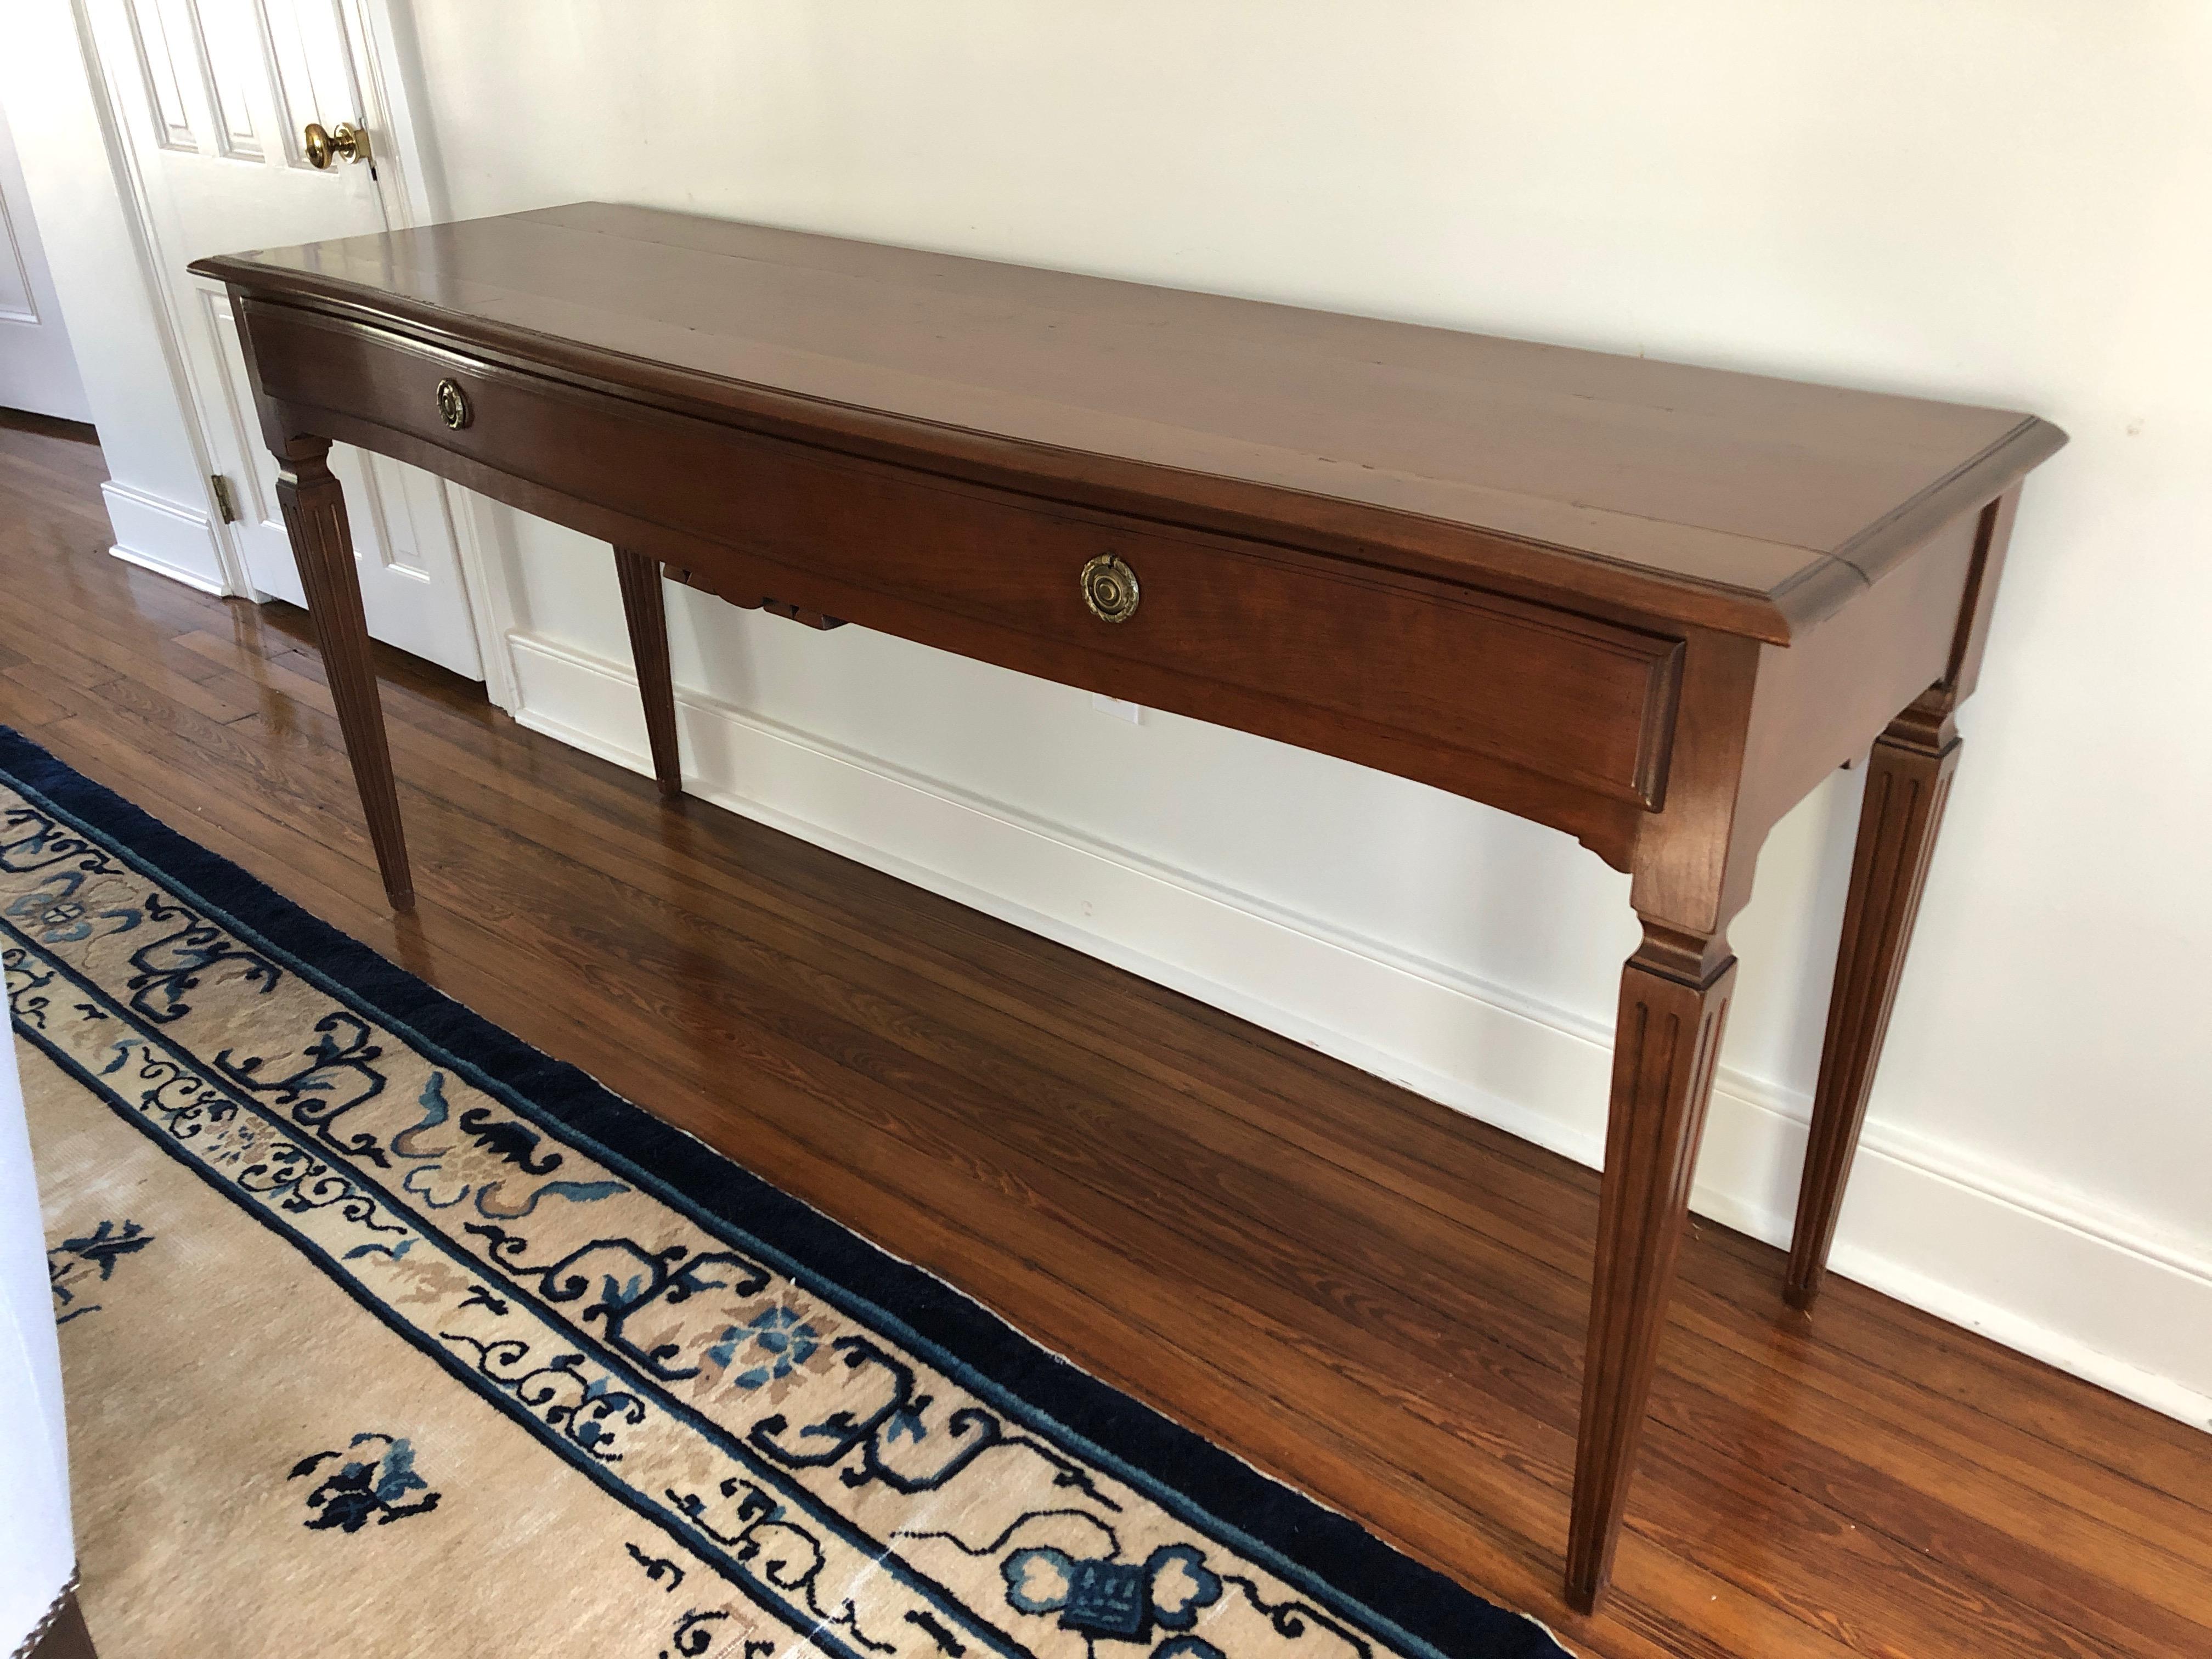 Elegant mahogany very long console or sideboard having one elongated drawer with original brass hardware and lovely tapered reeded legs.